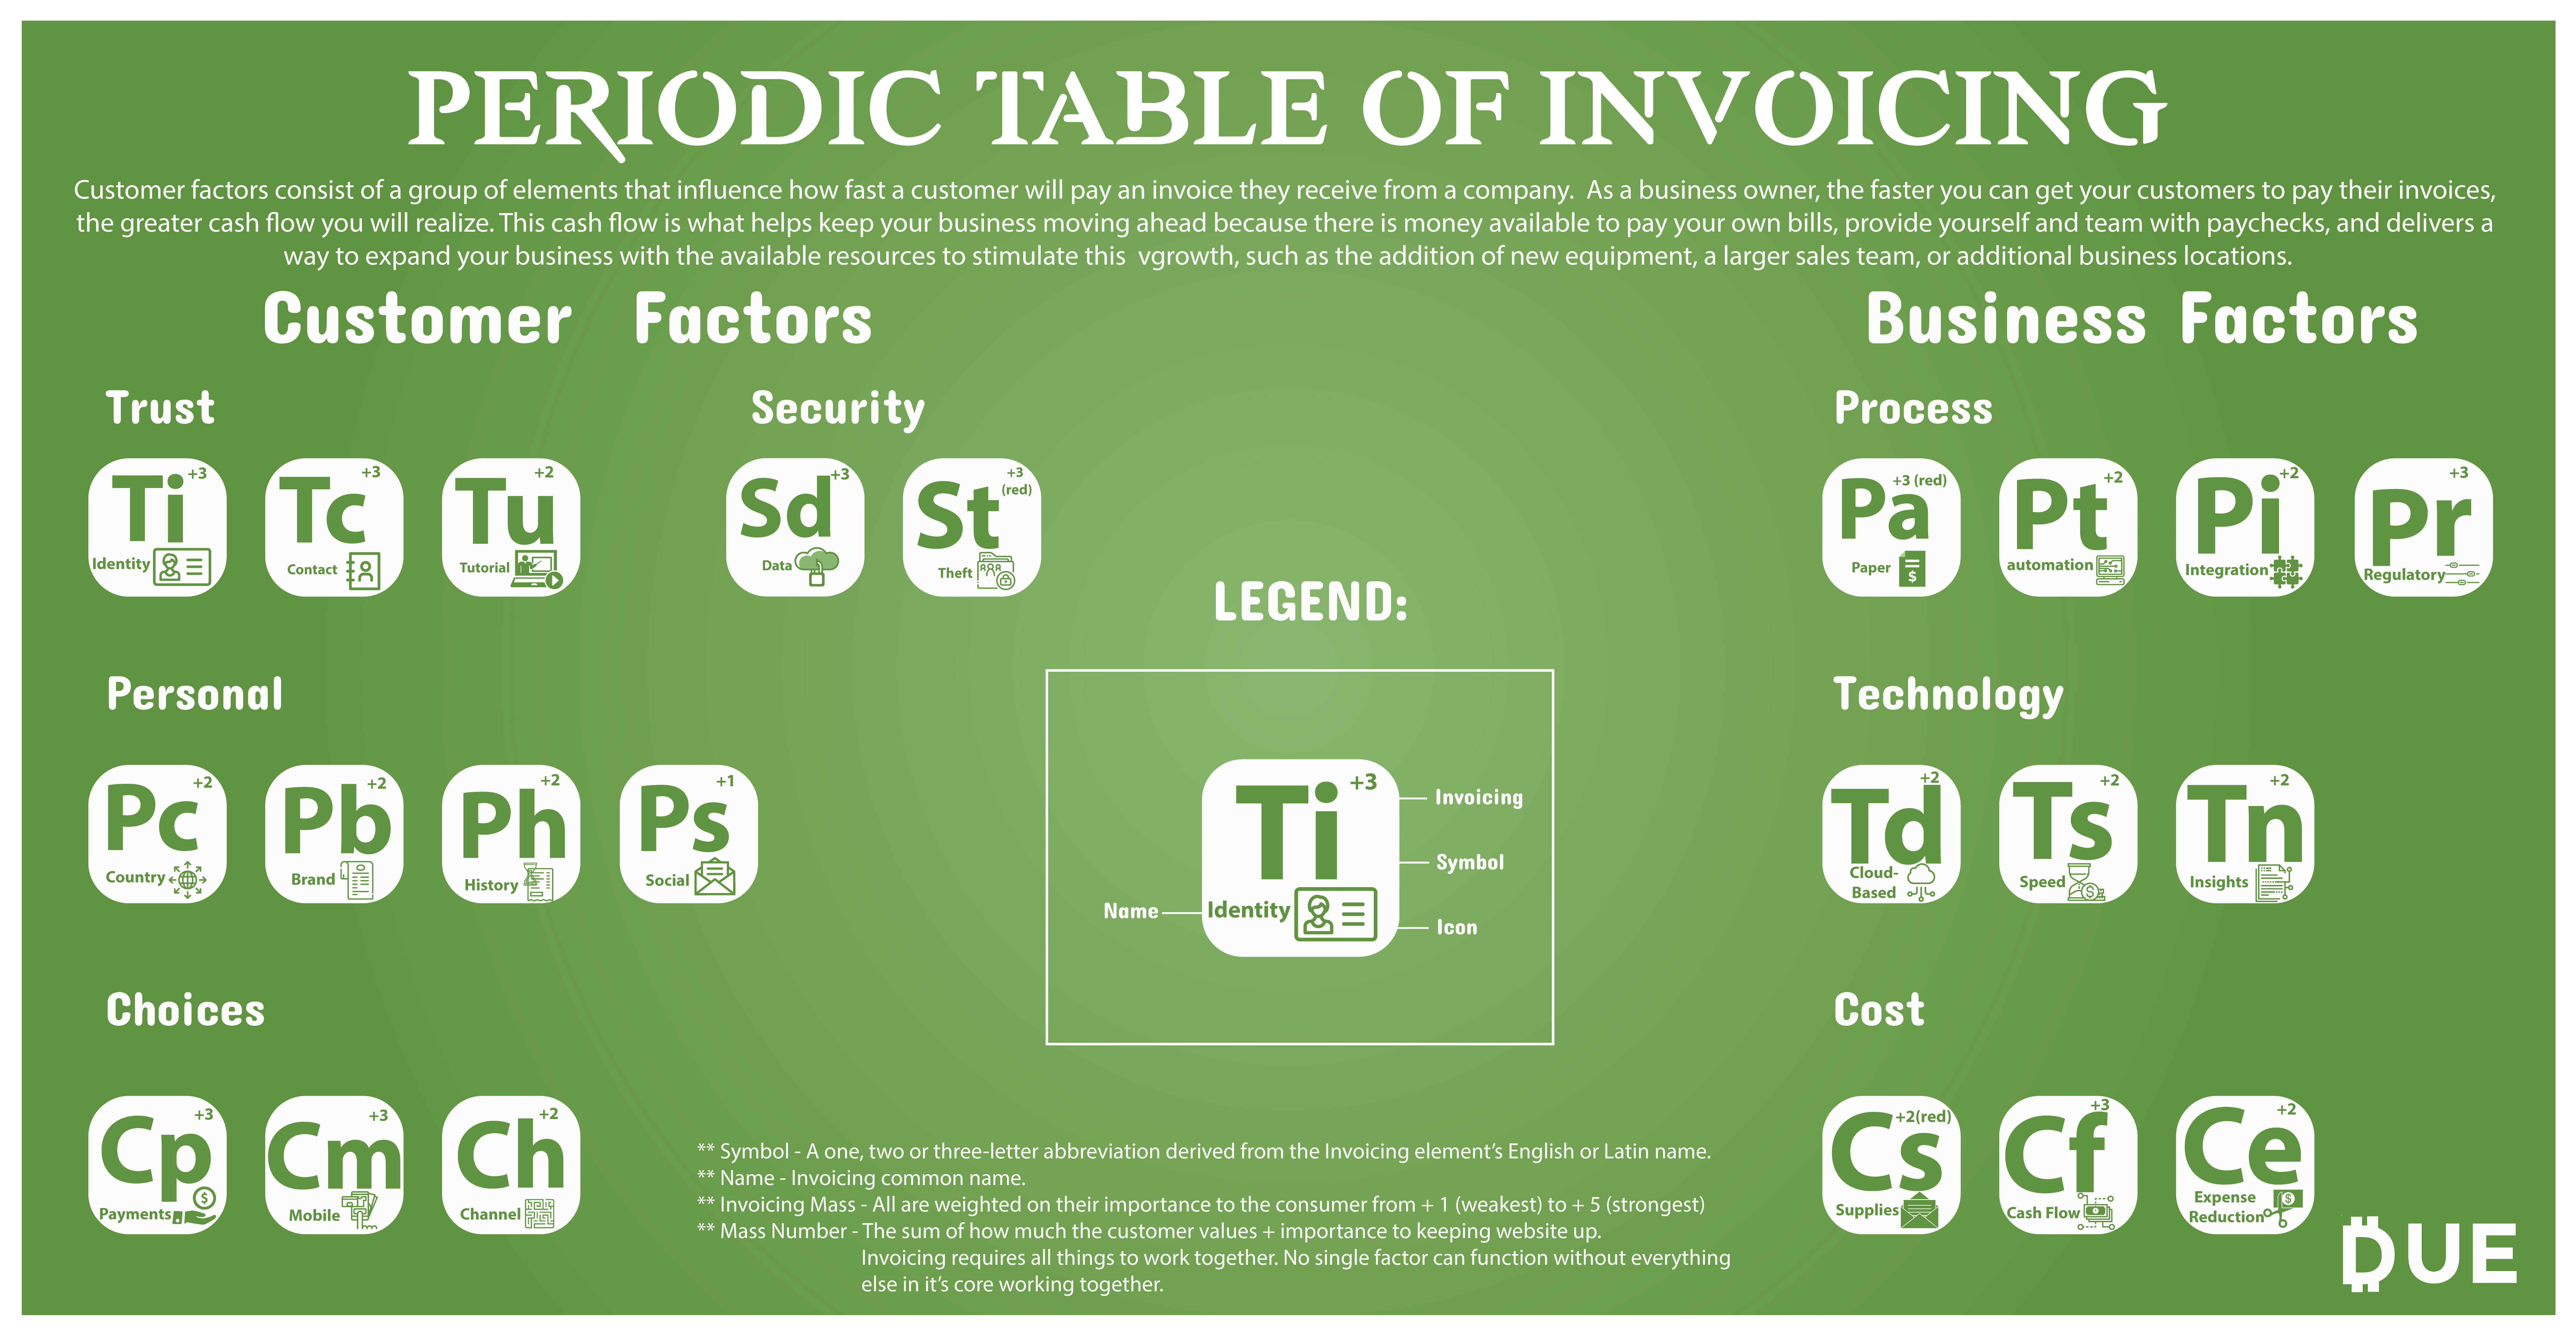 Periodic table of invoicing